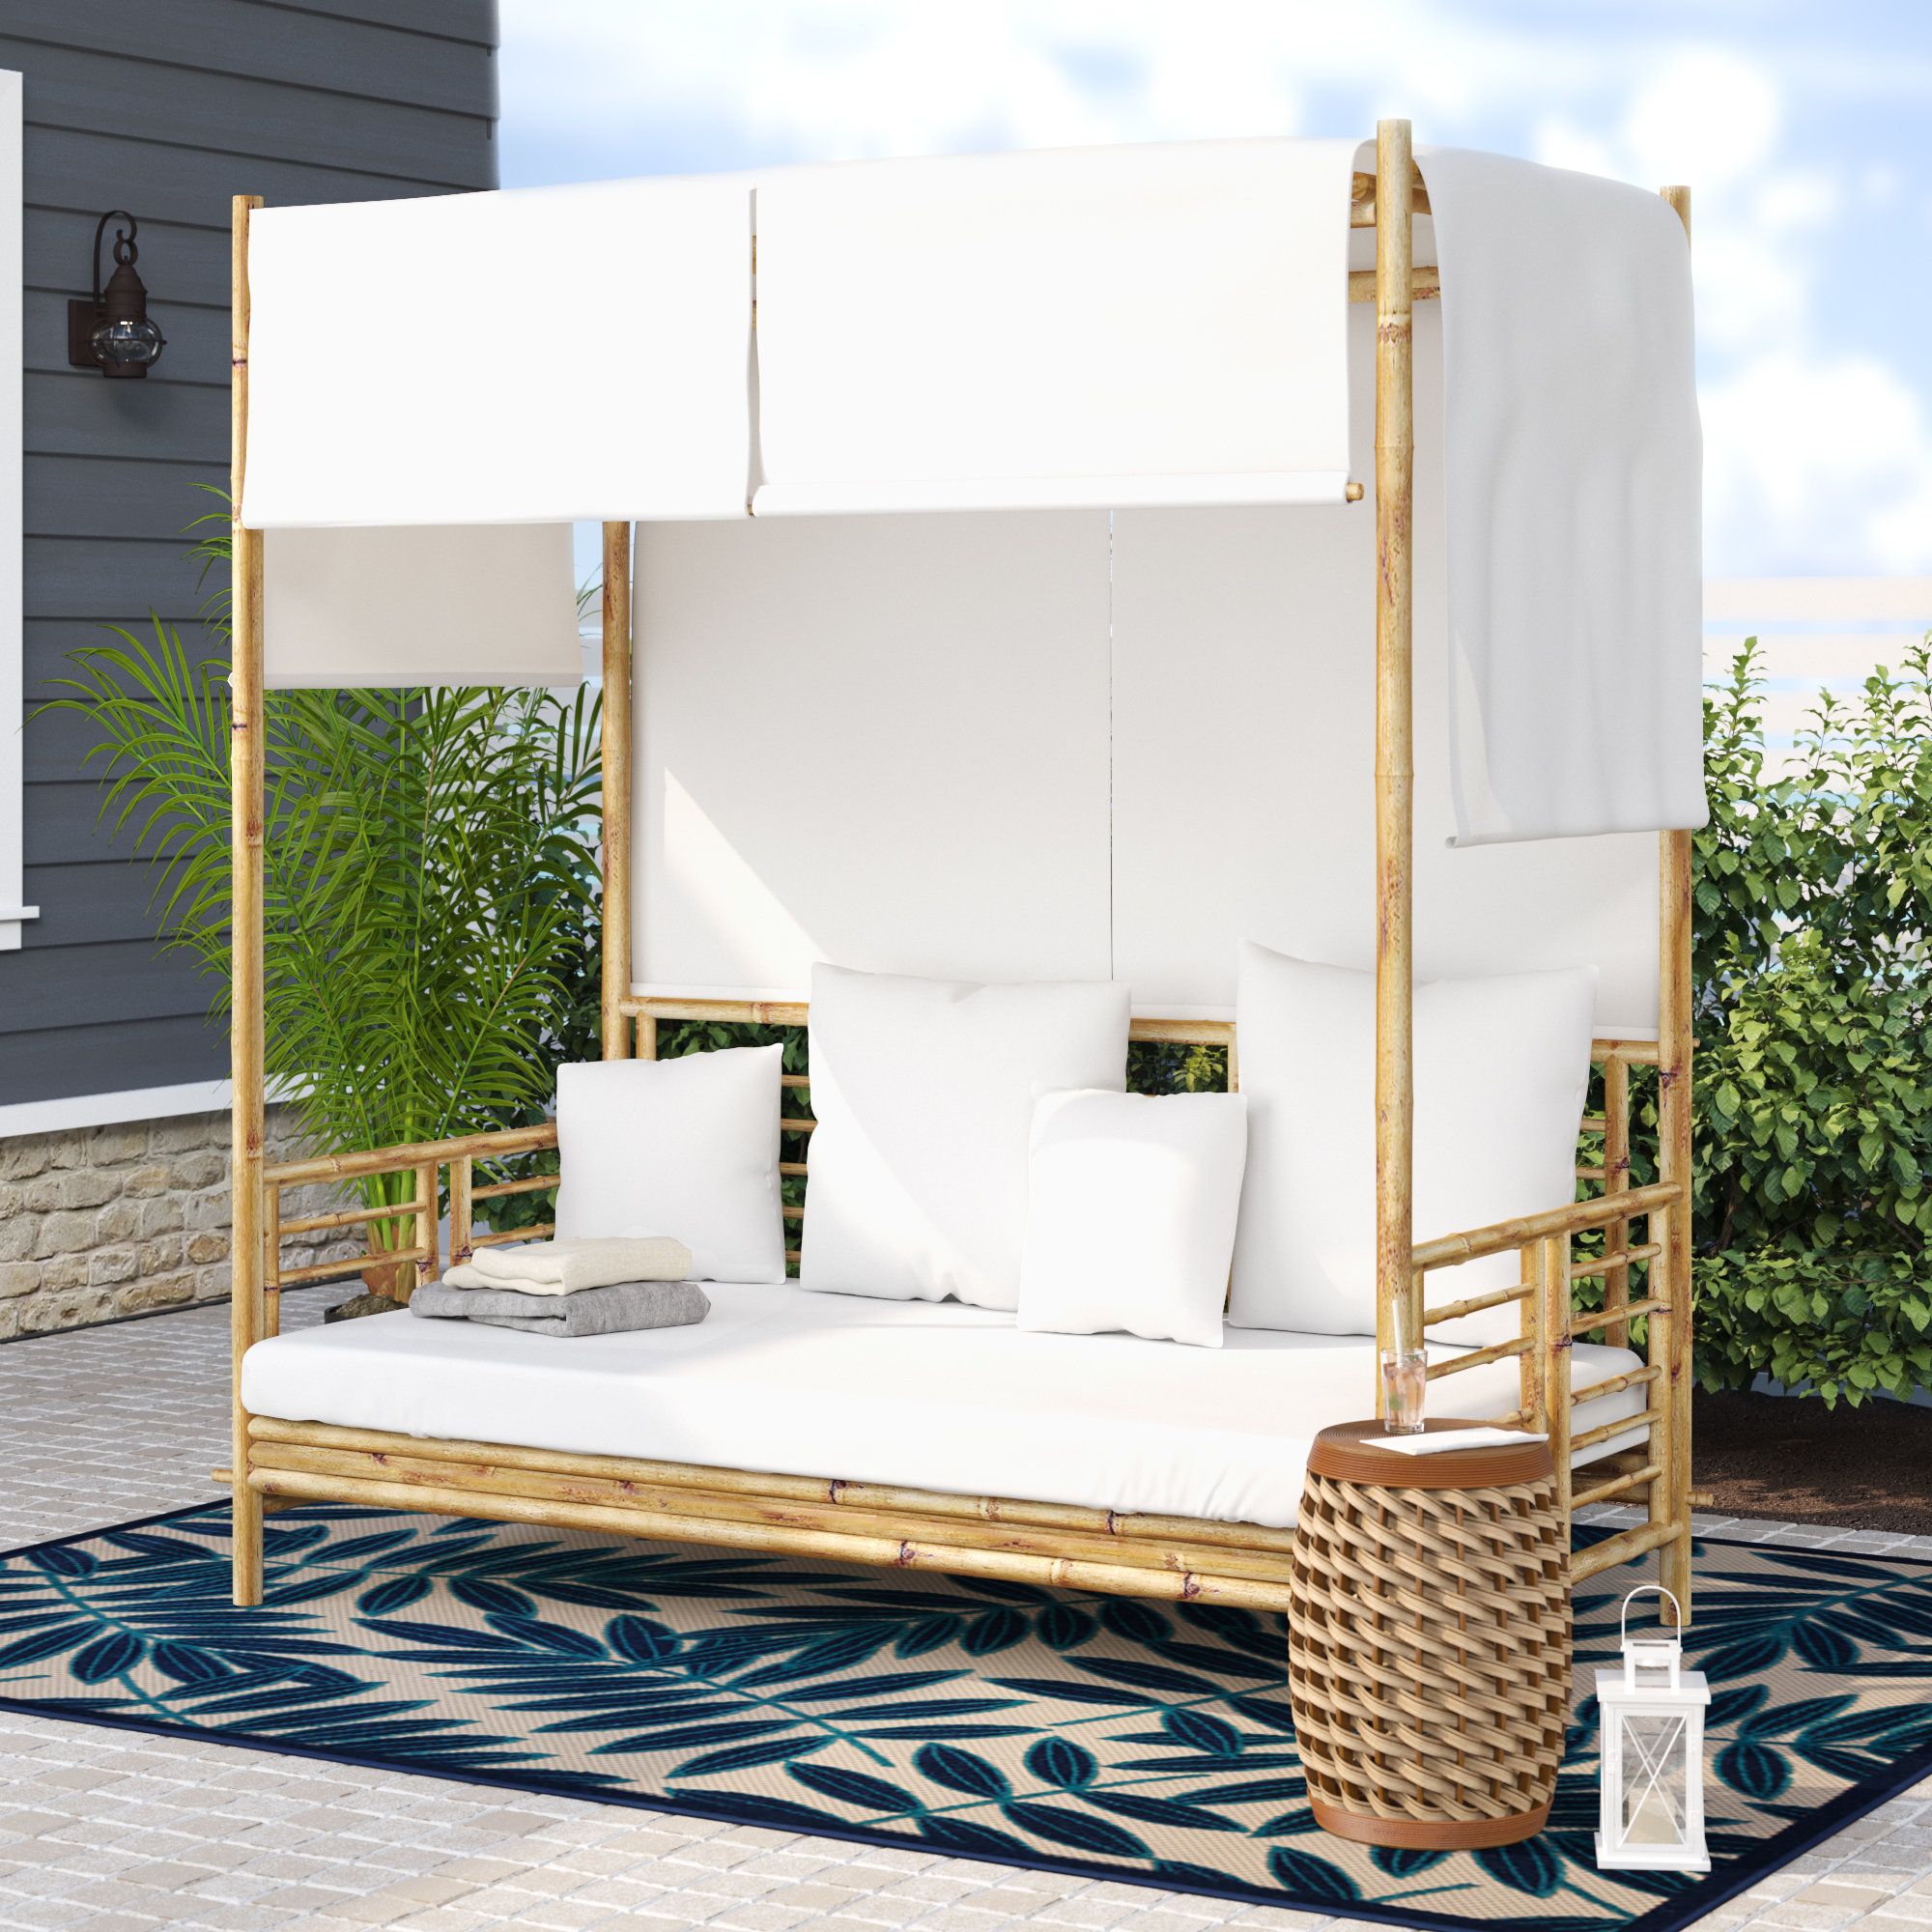 Most Popular Aubrie Patio Daybeds With Cushions Within Beachcrest Home Aubrie Patio Daybed With Cushions (View 2 of 25)